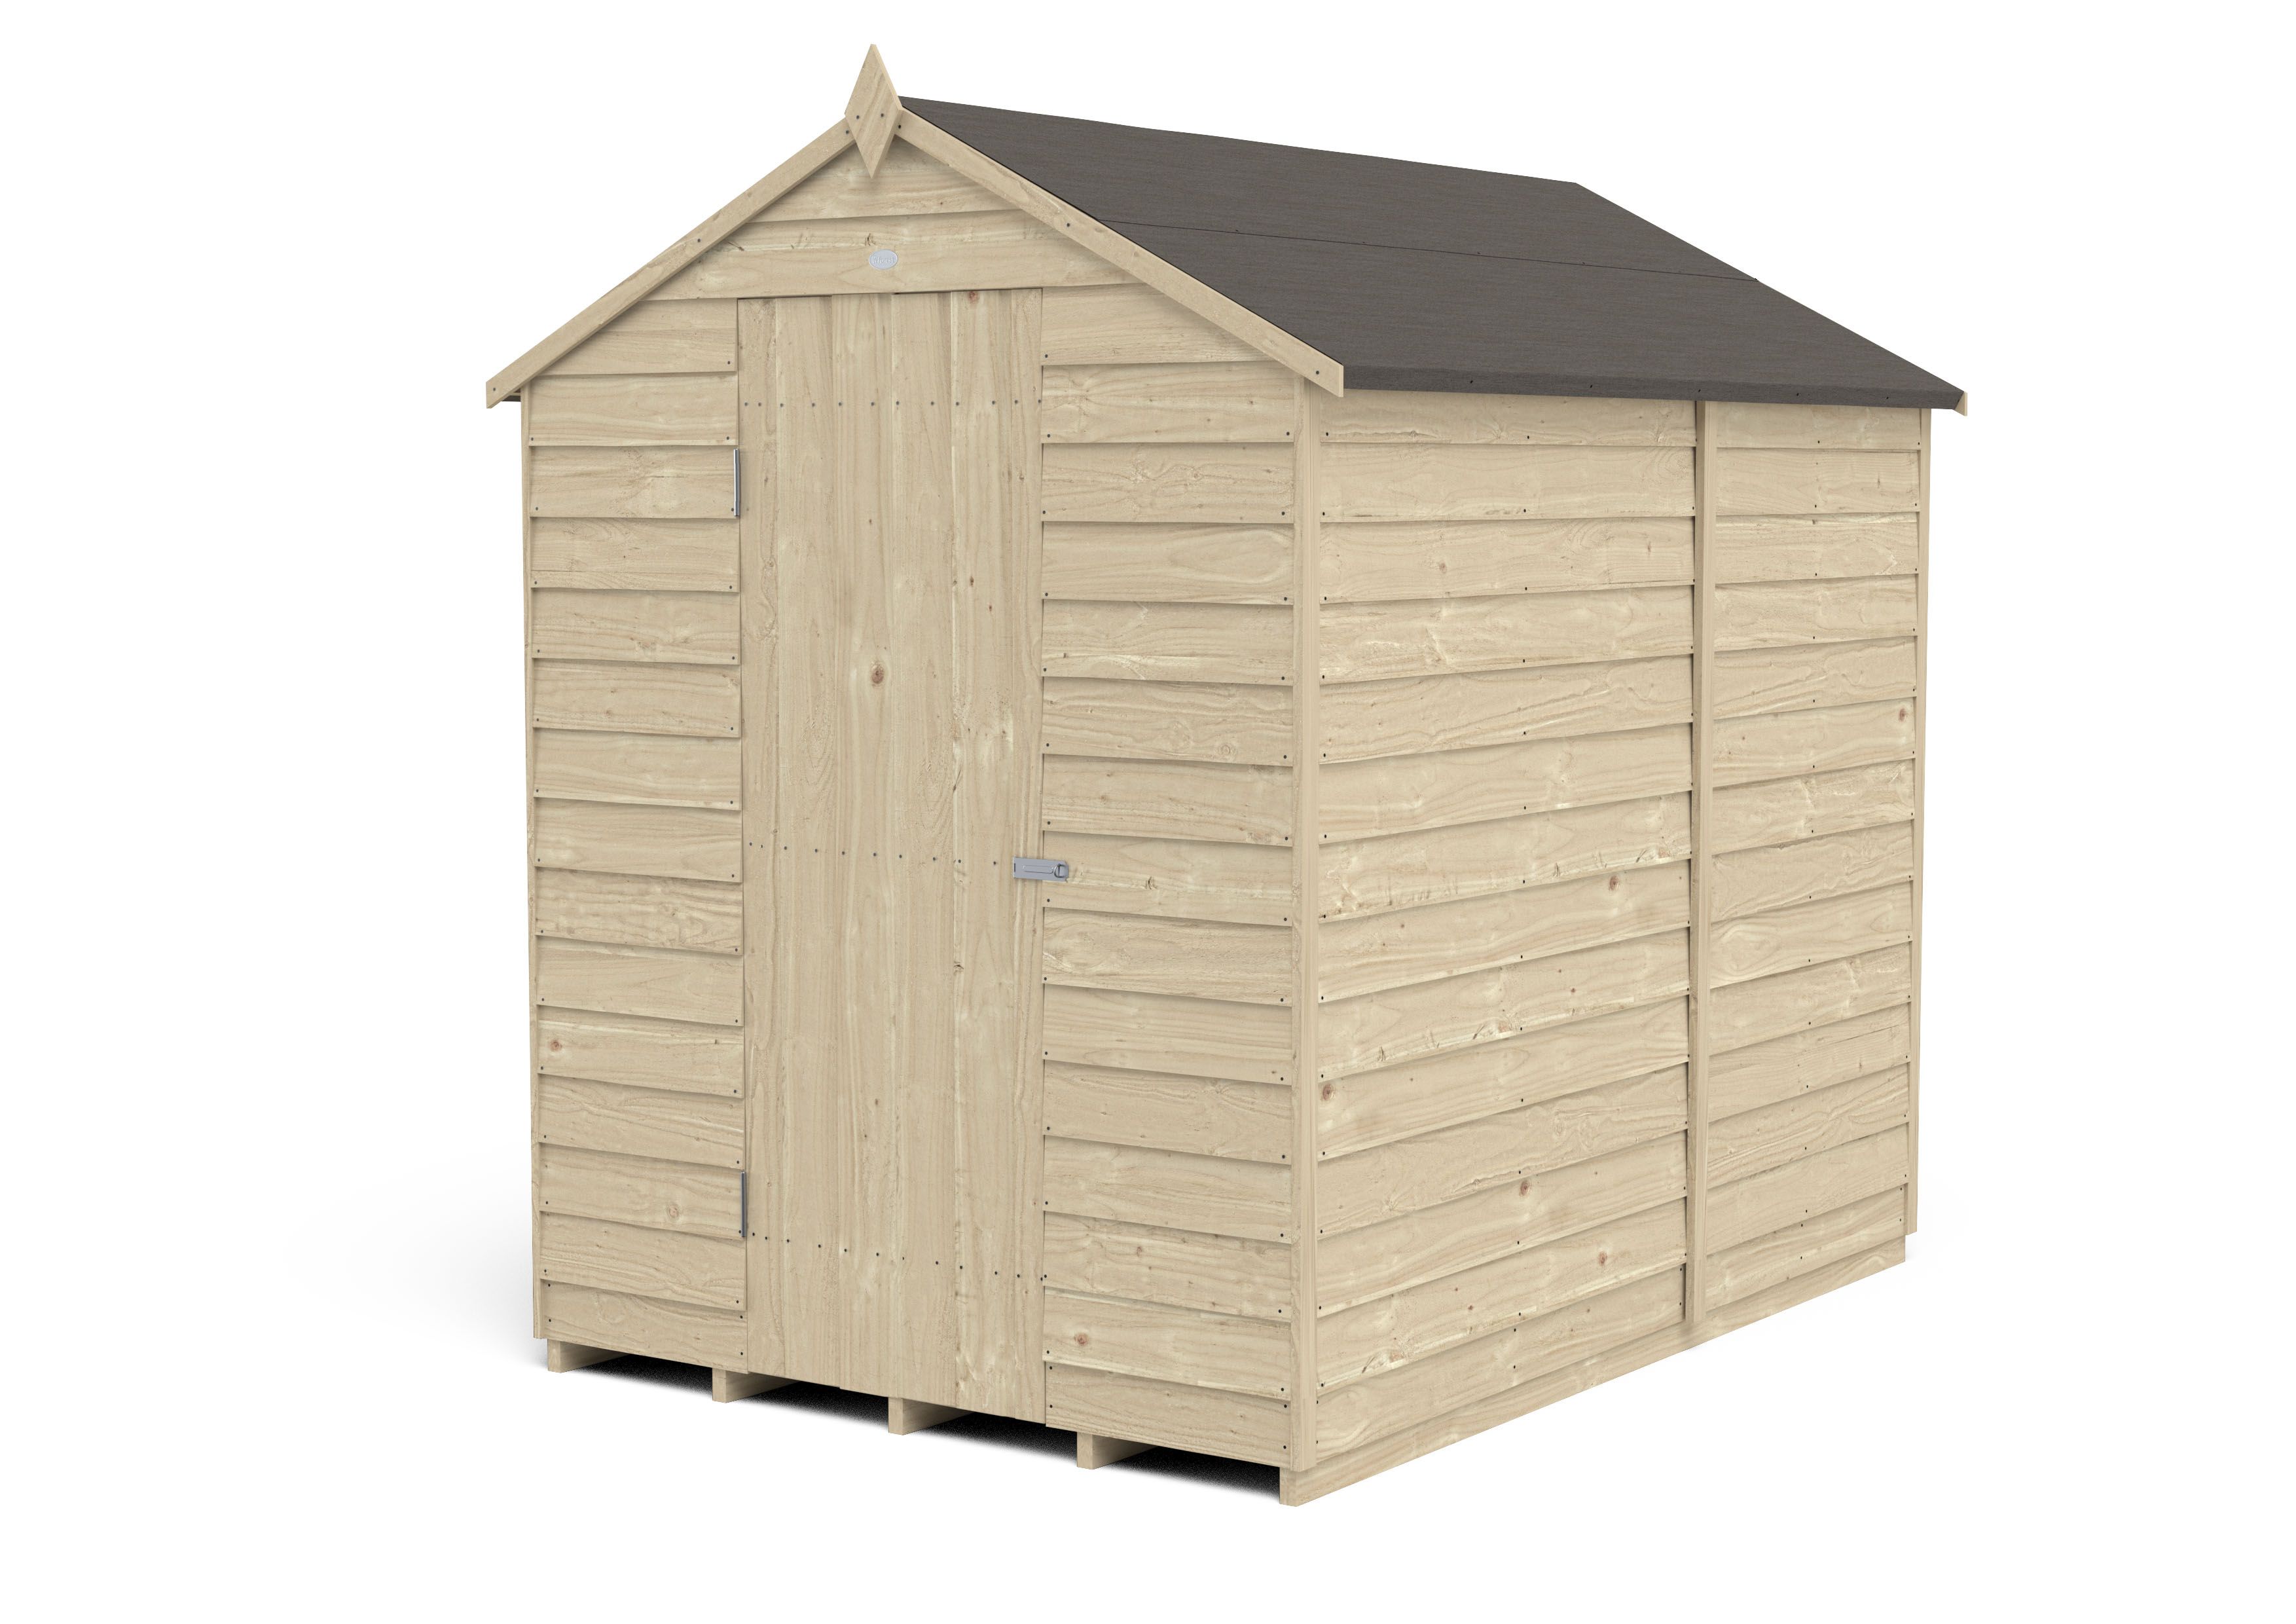 Forest Garden Overlap 7x5 ft Apex Wooden Pressure treated Shed with floor (Base included) - Assembly service included